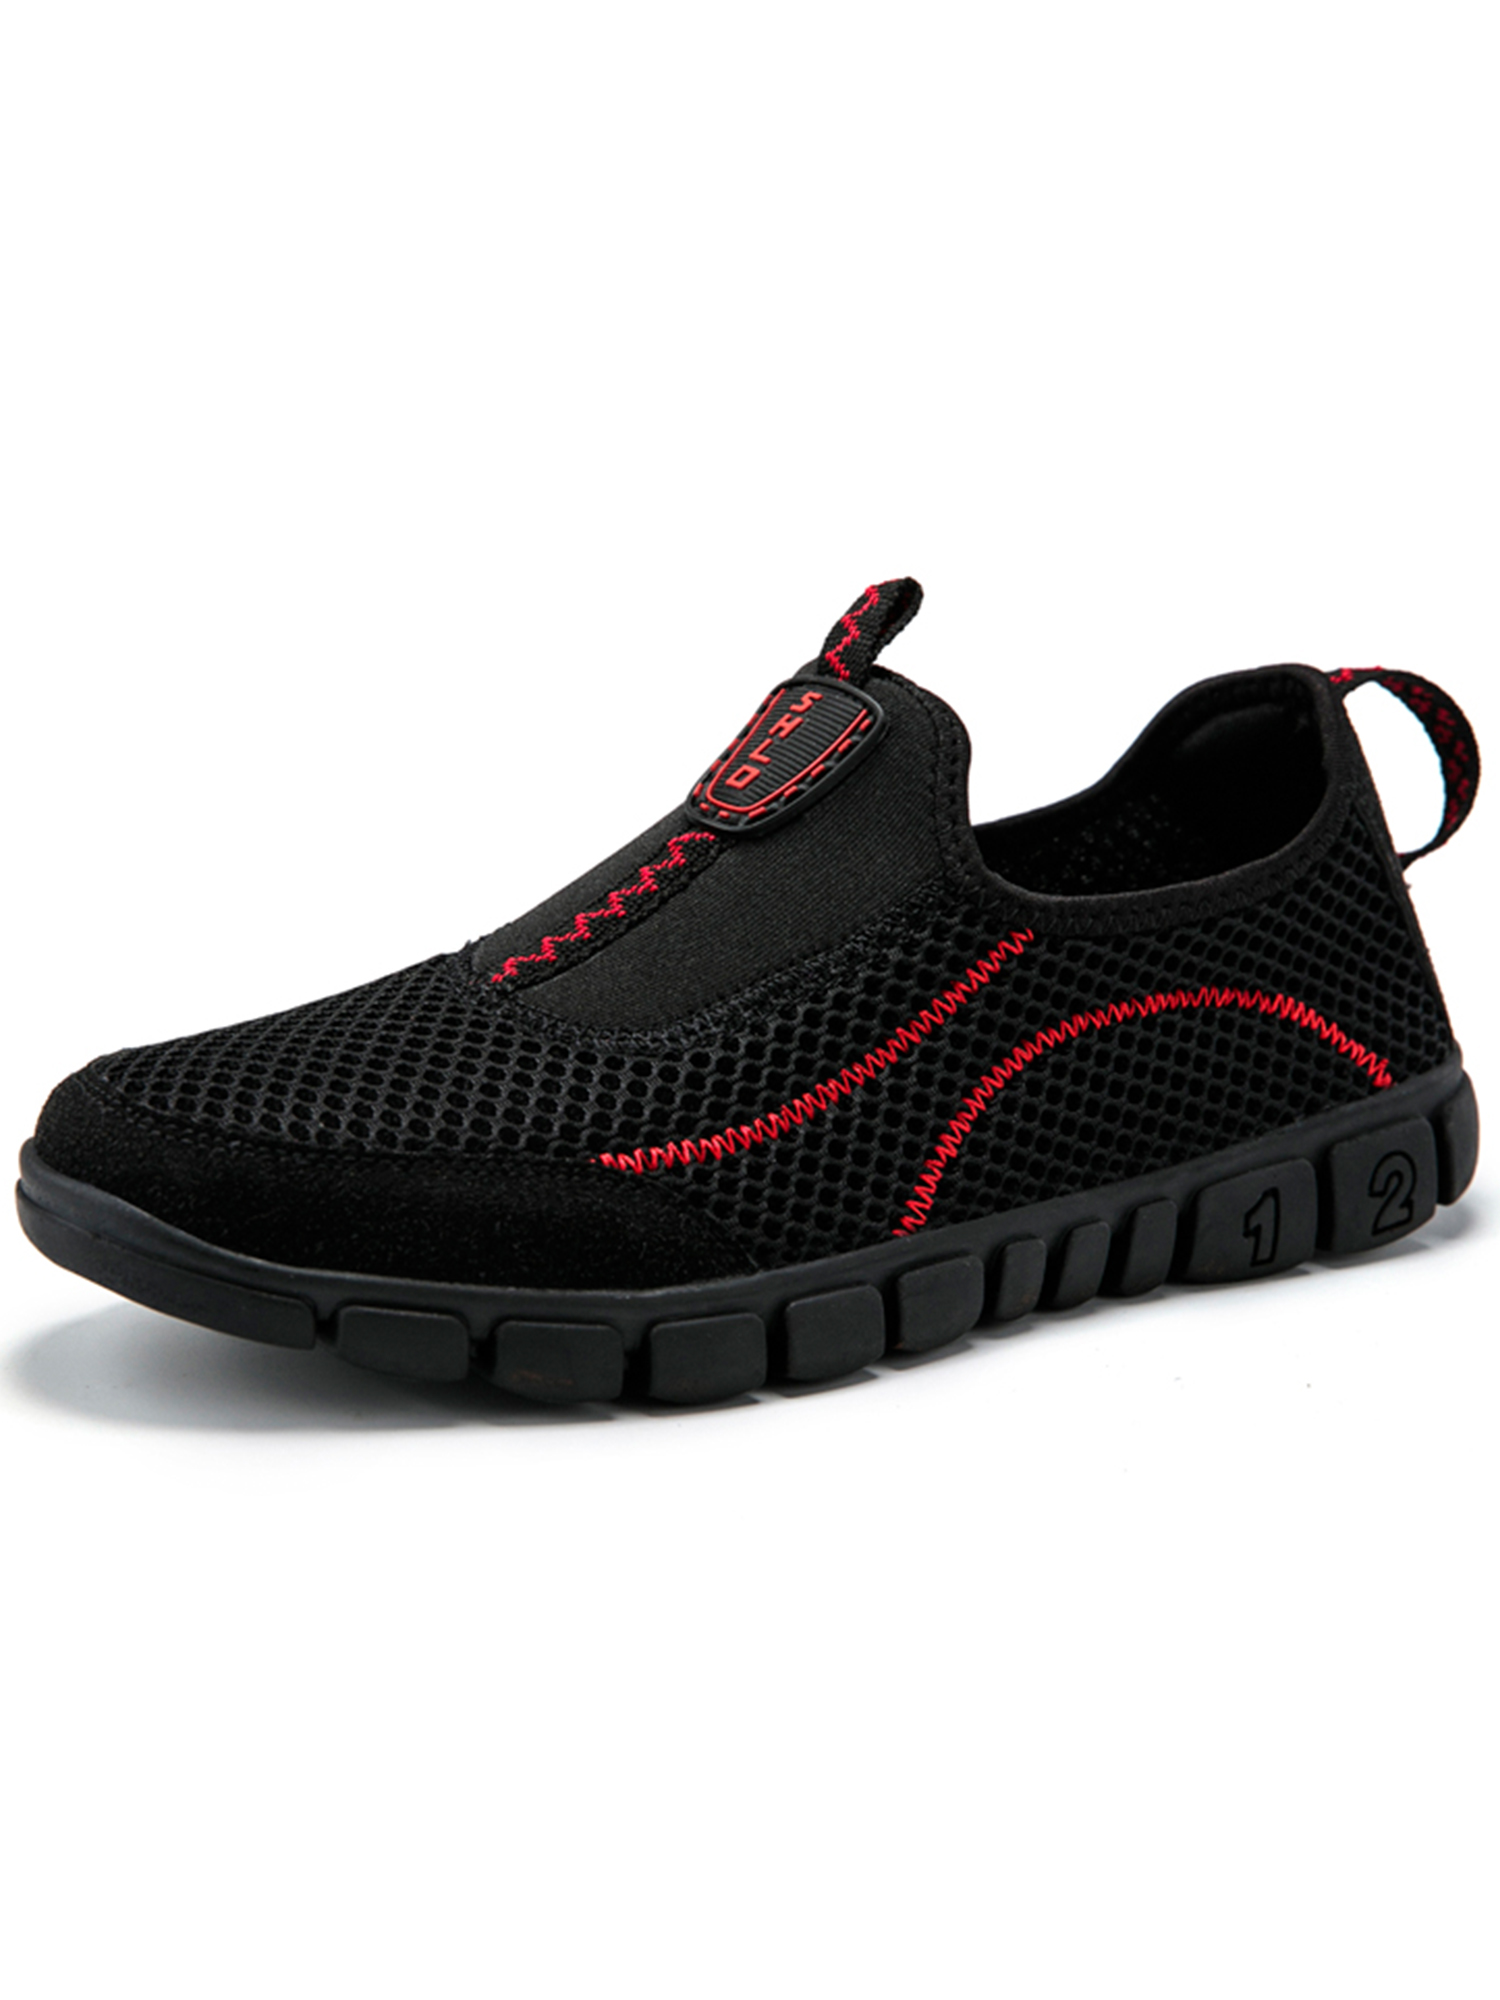 Men Mesh Athletic Walking Shoes Quick Dry Beach Water Sports Shoes Lightweight Slip On Sneakers